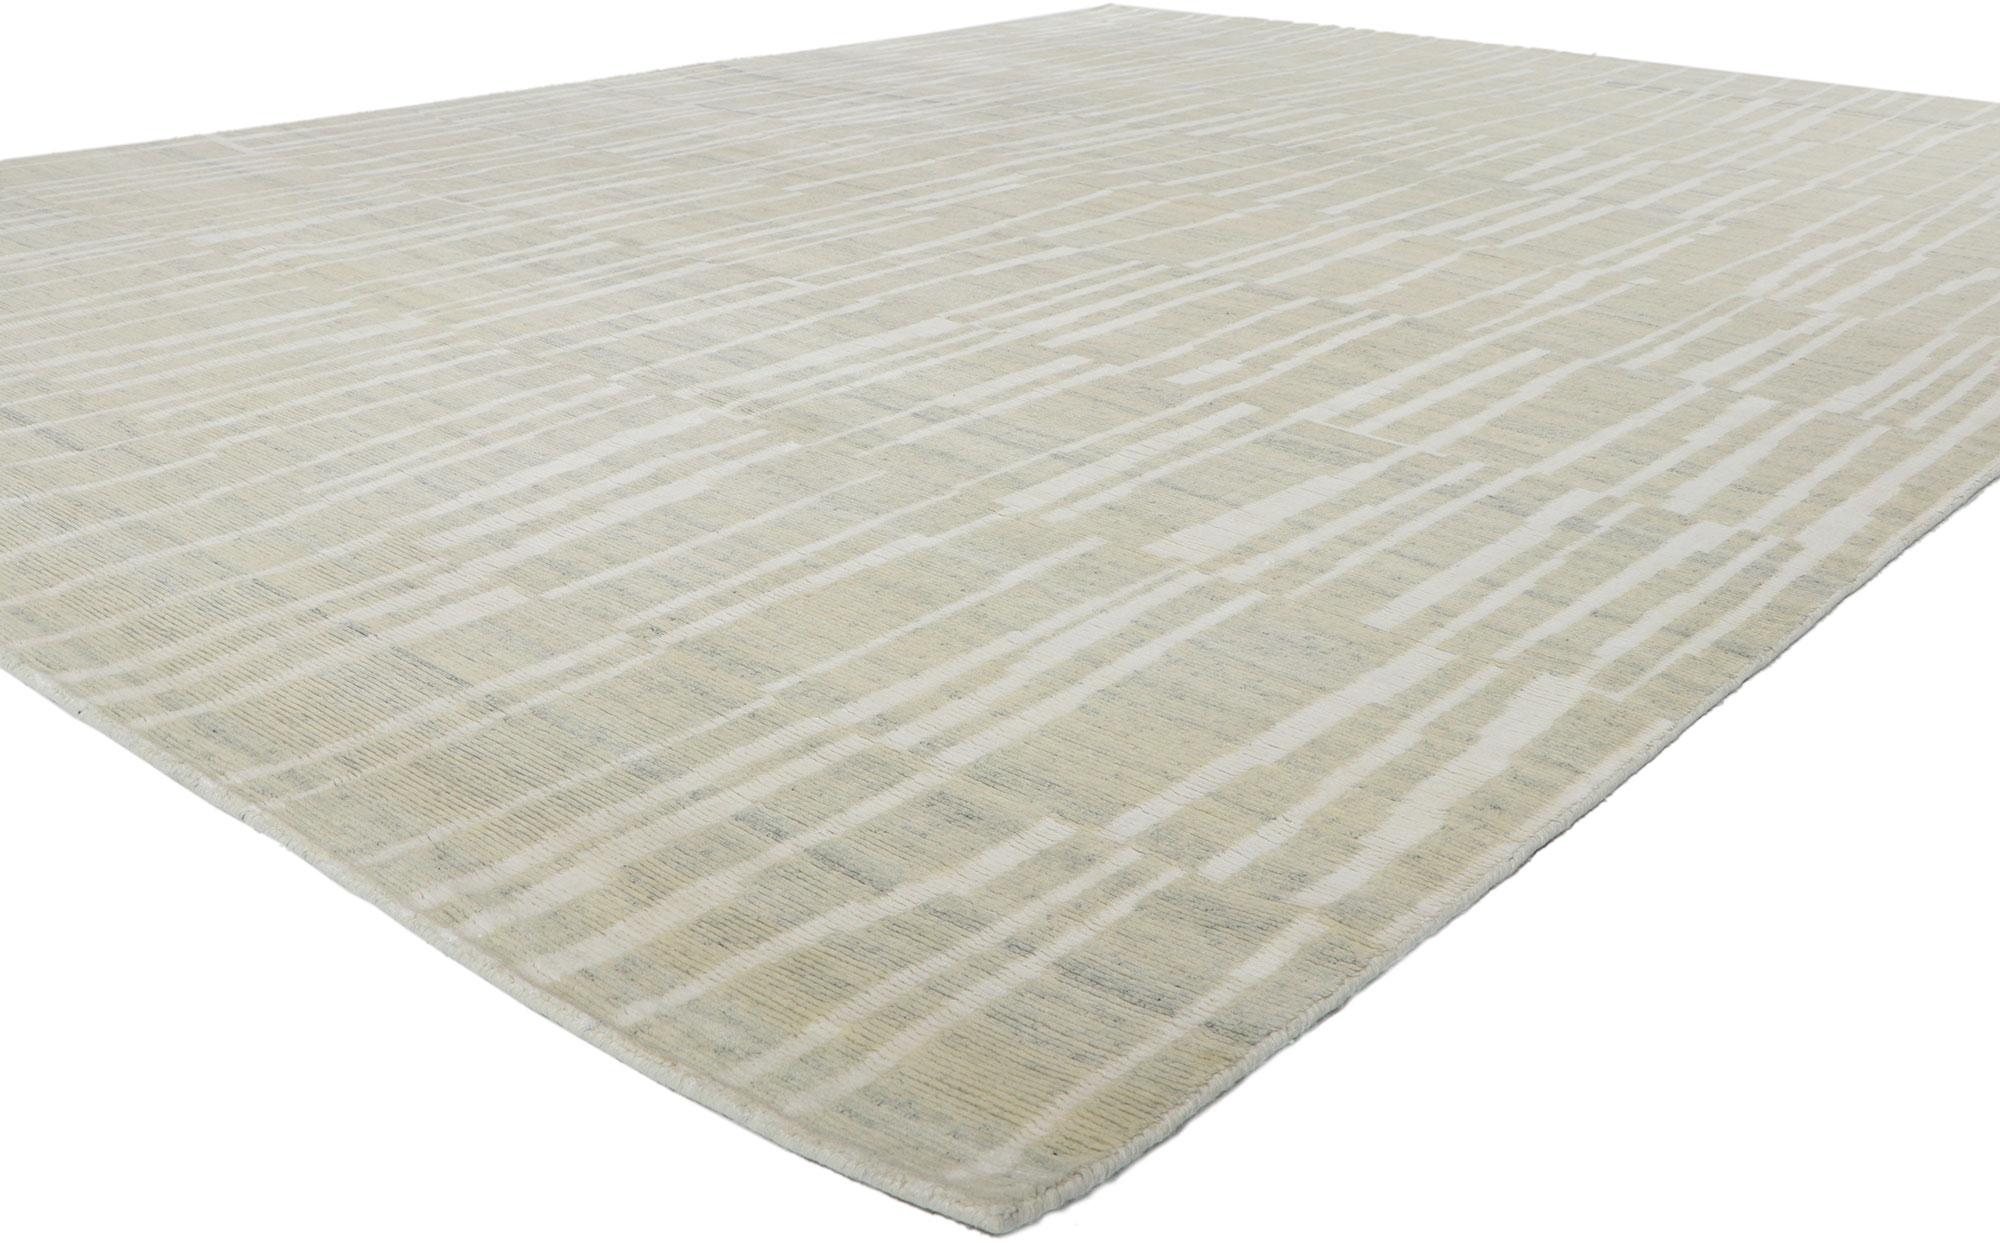 30874 New Transitional rug Inspired by Sol LeWitt, 09'01 x 11'11. With its simplicity, incredible detail and texture, this hand knotted wool transitional area rug is a captivating vision of woven beauty. The eye-catching linear design and neutral